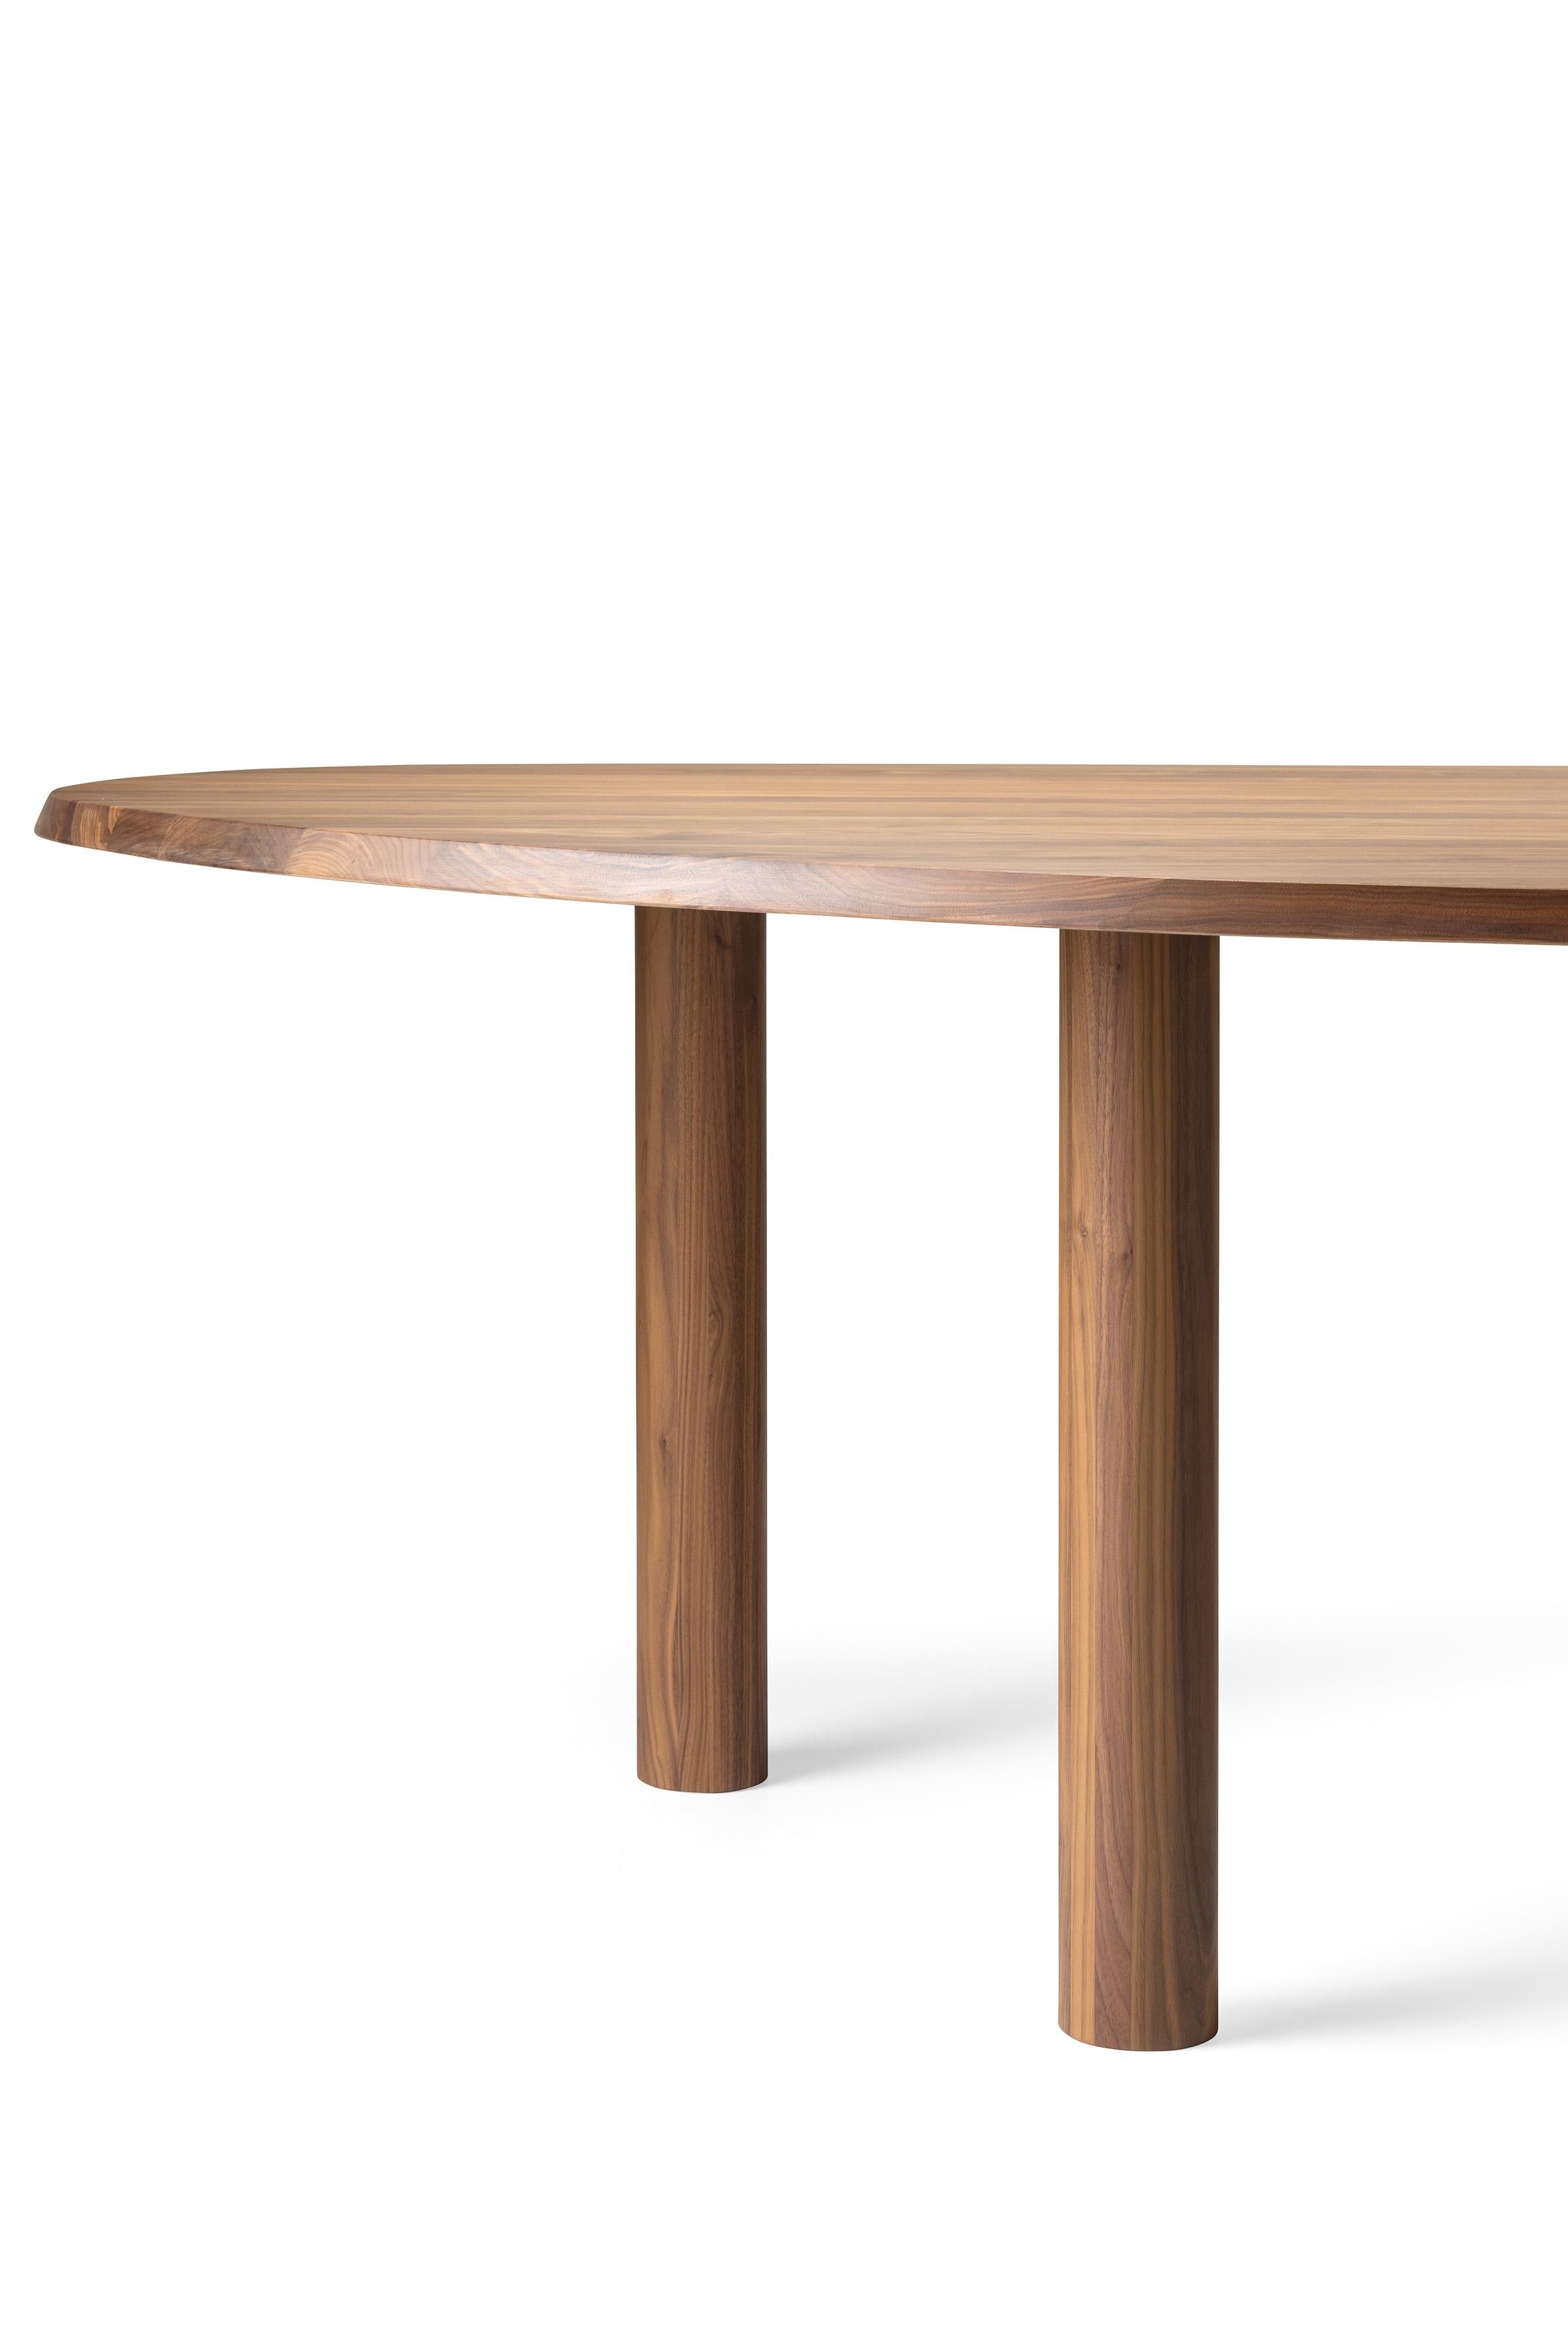 Dutch Kluskens Pernette Dining Table For Sale